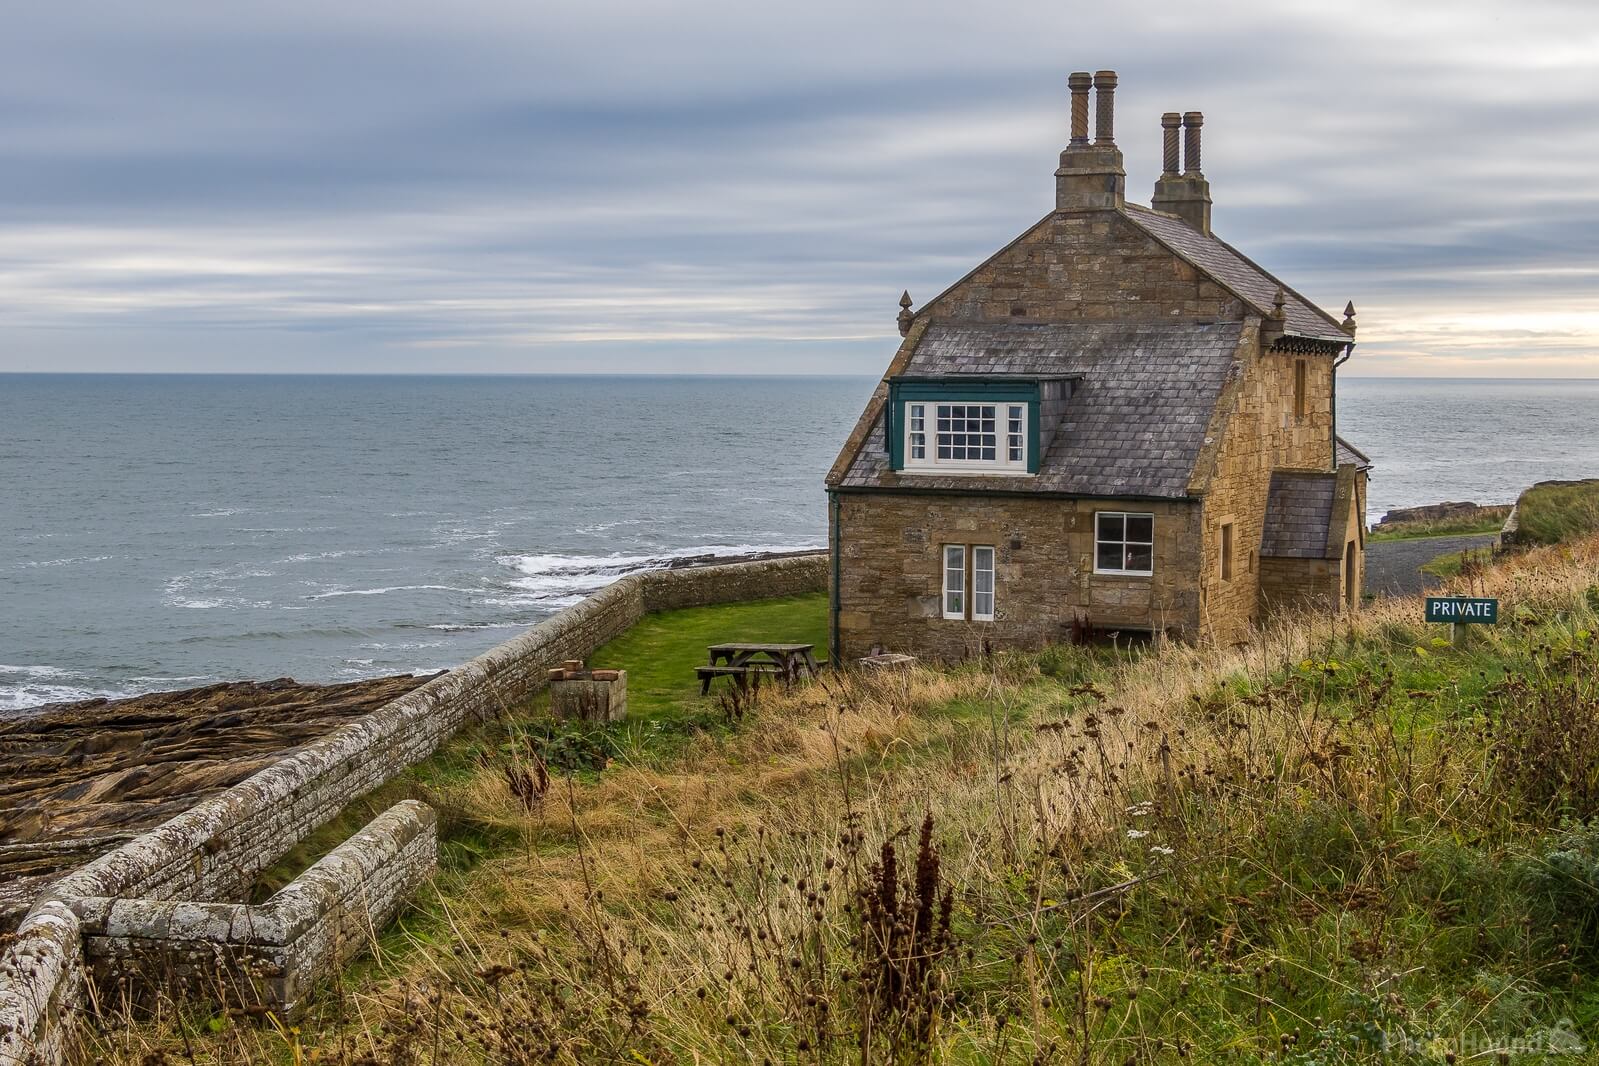 Image of Howick Bathing House by Andy Killingbeck